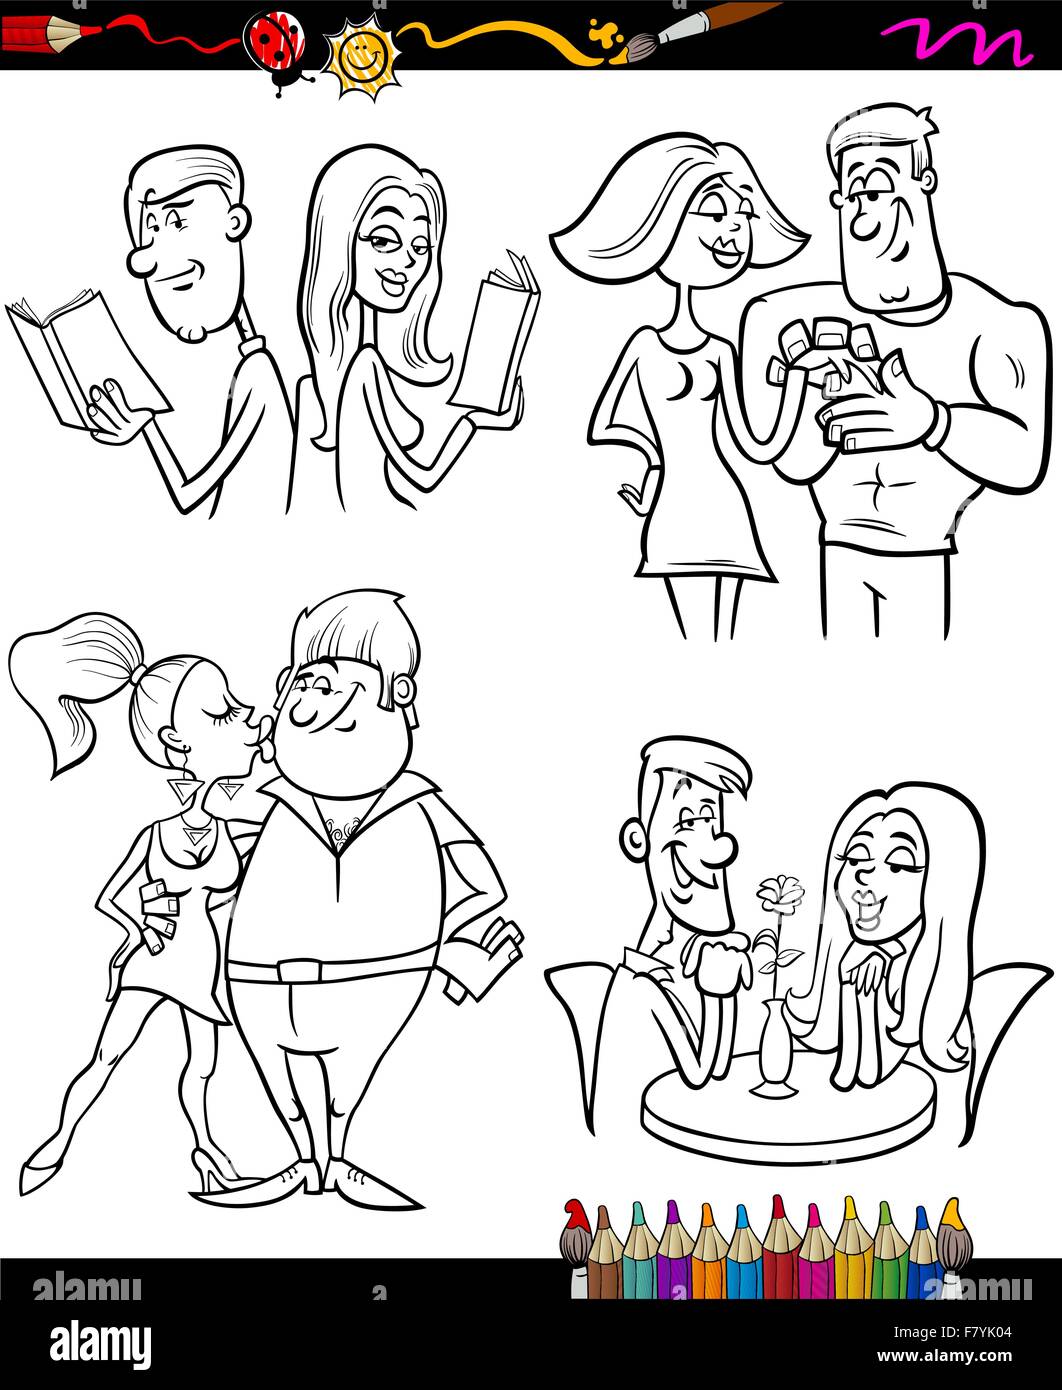 couples set cartoon coloring page Stock Vector